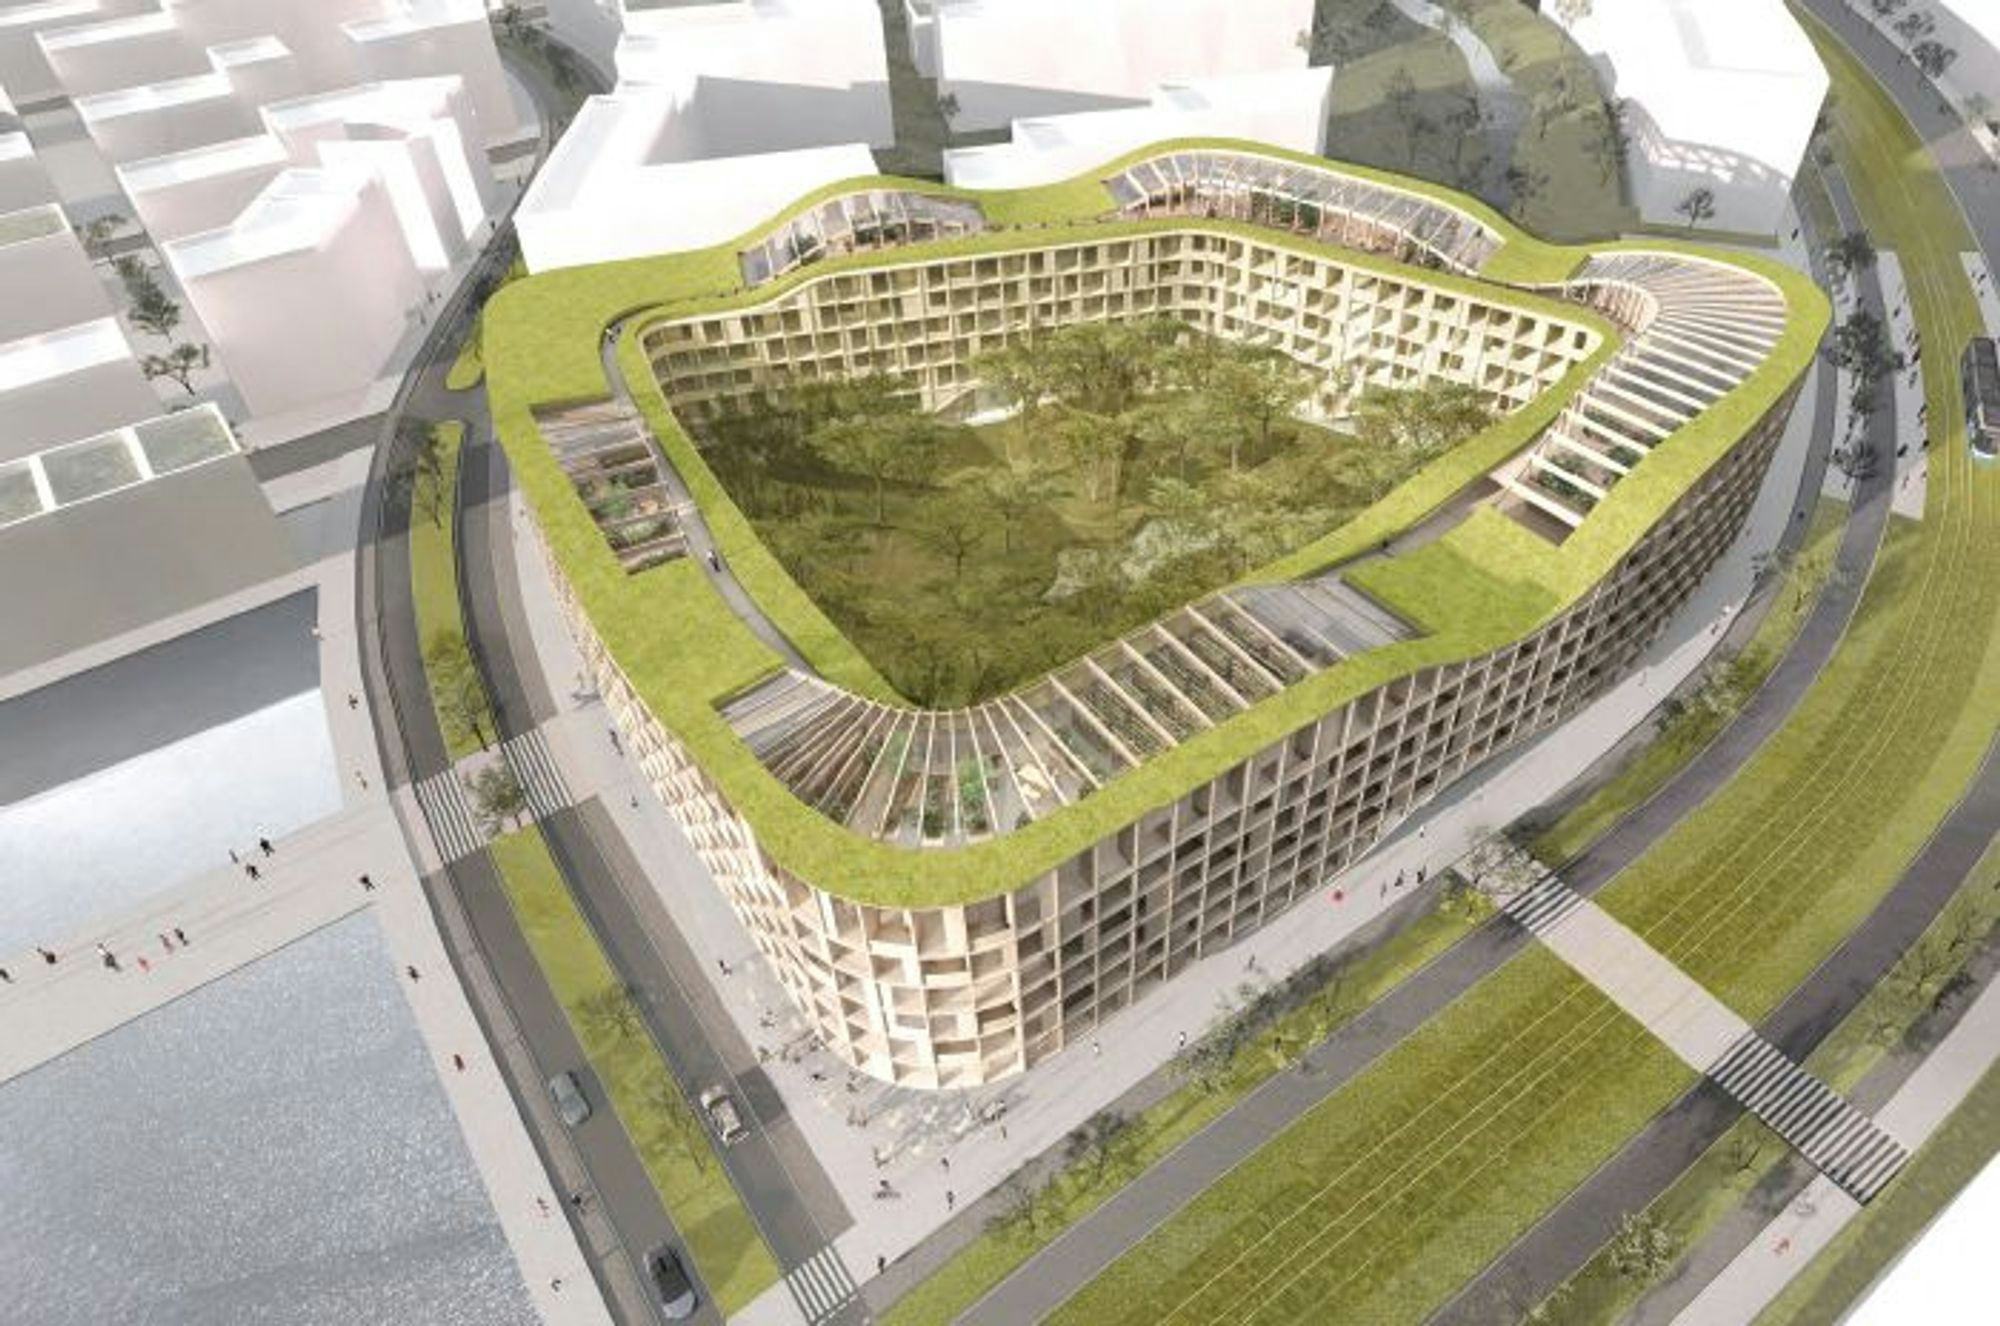 3D model of O-shaped building complex encompassing a central green courtyard with trees 